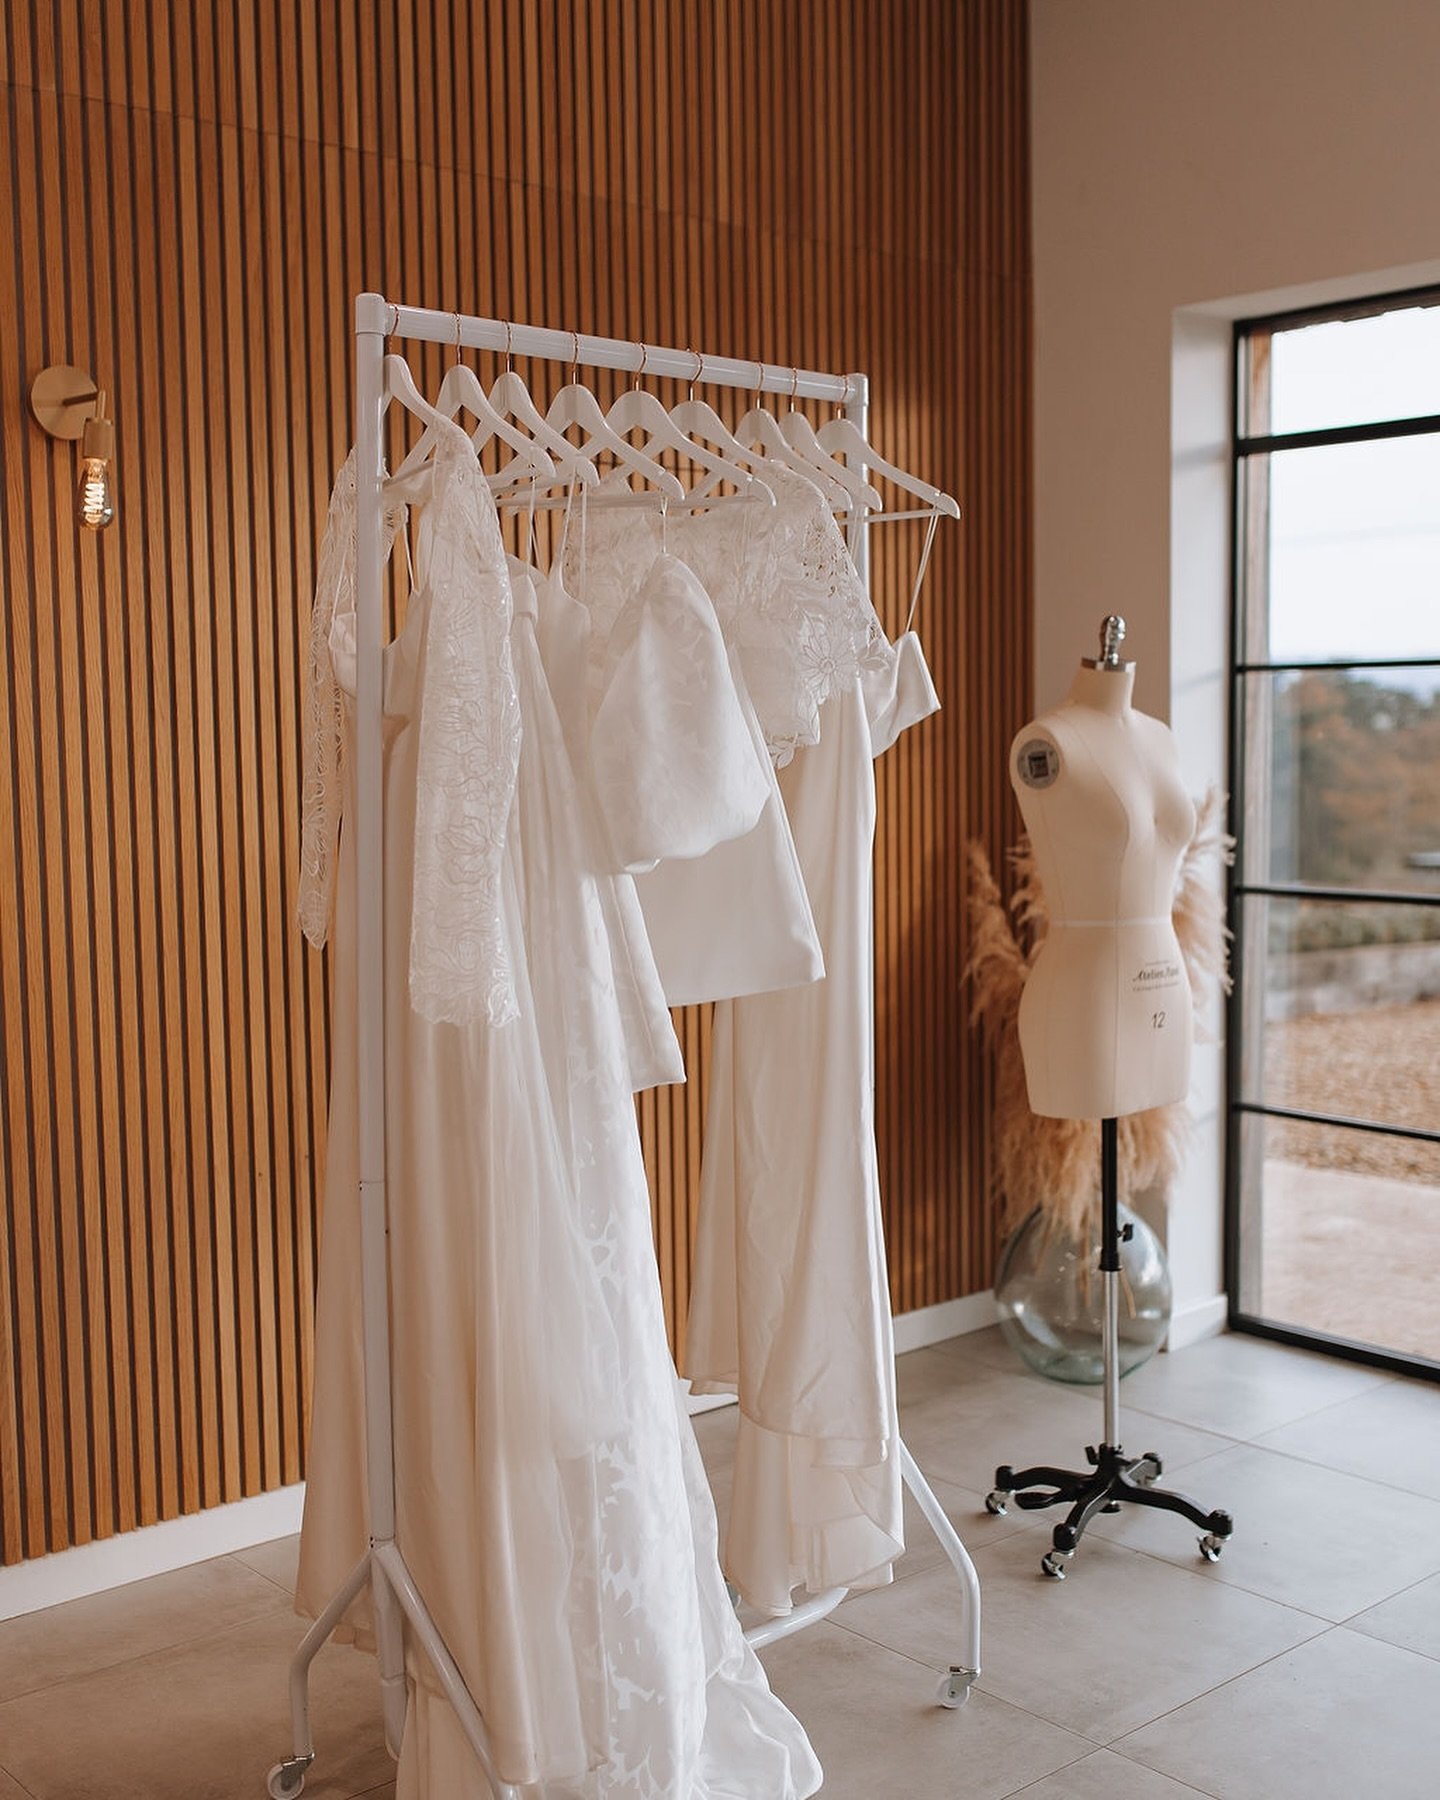 You&rsquo;ll hear the term &lsquo;bespoke&rsquo; used in abundance around here, and that&rsquo;s simply because it&rsquo;s the way many of my brides choose to work with me. 

✨But it isn&rsquo;t the ONLY way to wear a Solunah dress&hellip;✨

When you